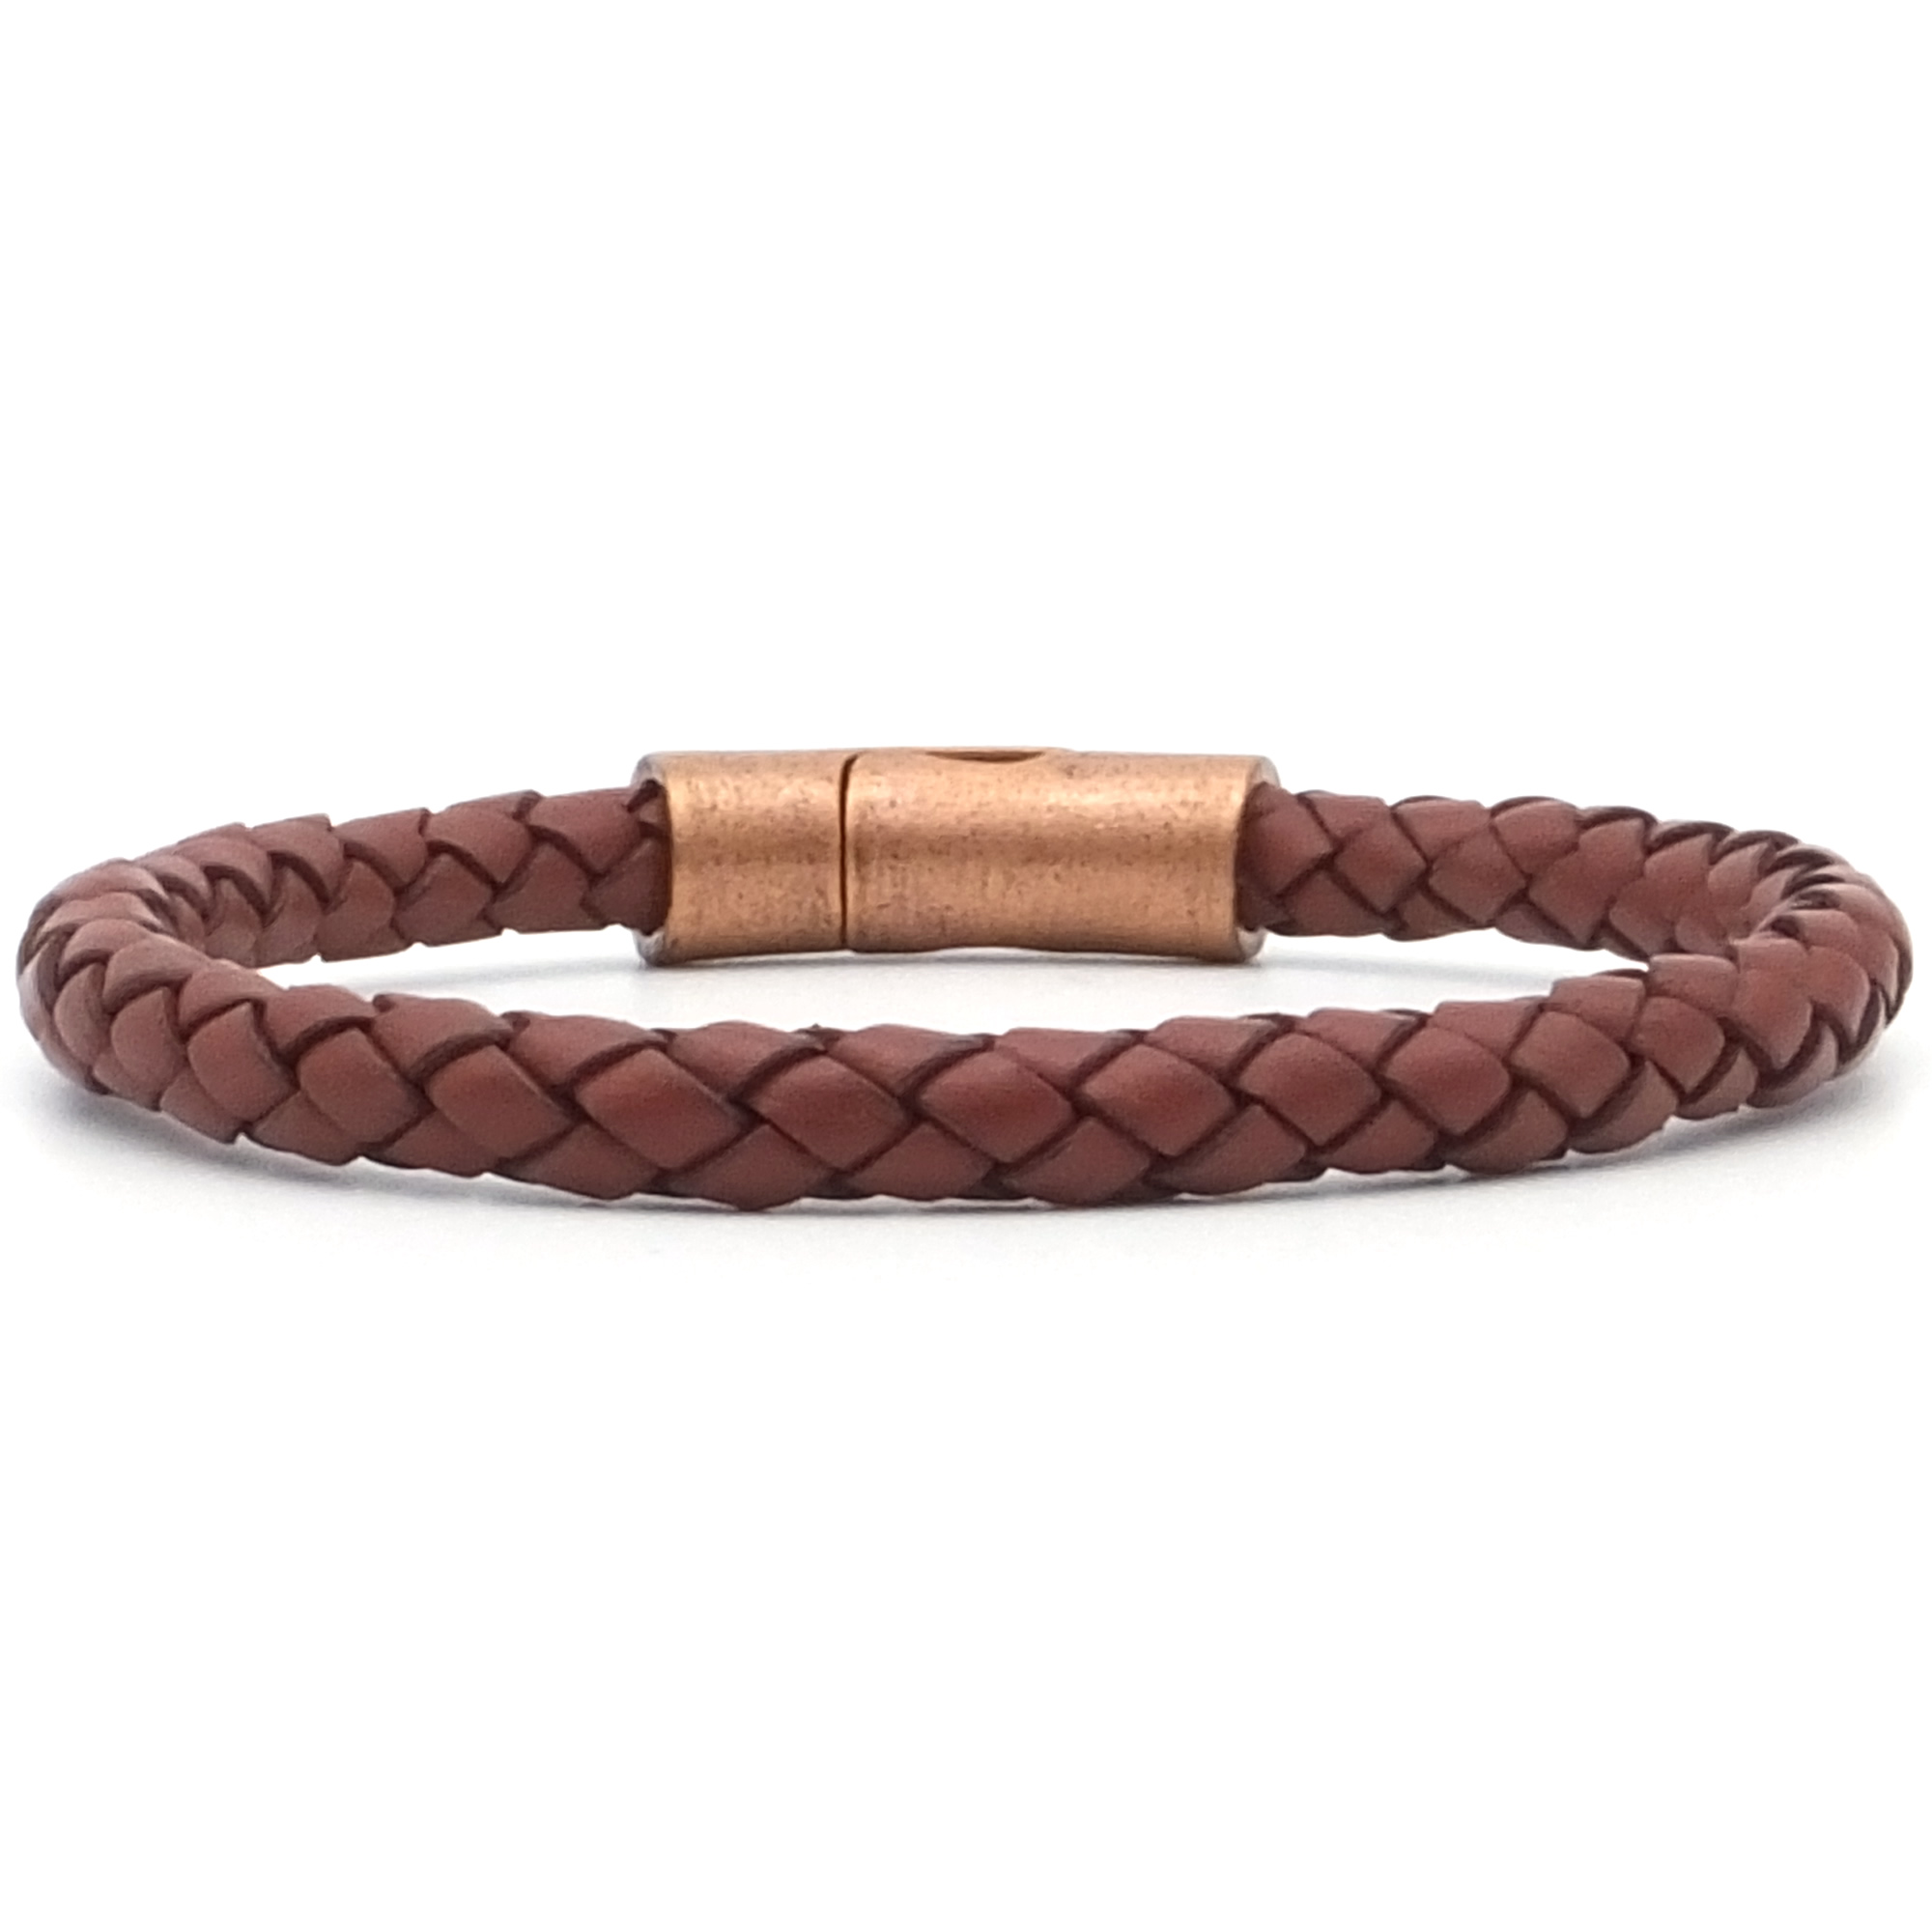 Arizona Leather Bracelet with Magnetic Antique Copper Clasp